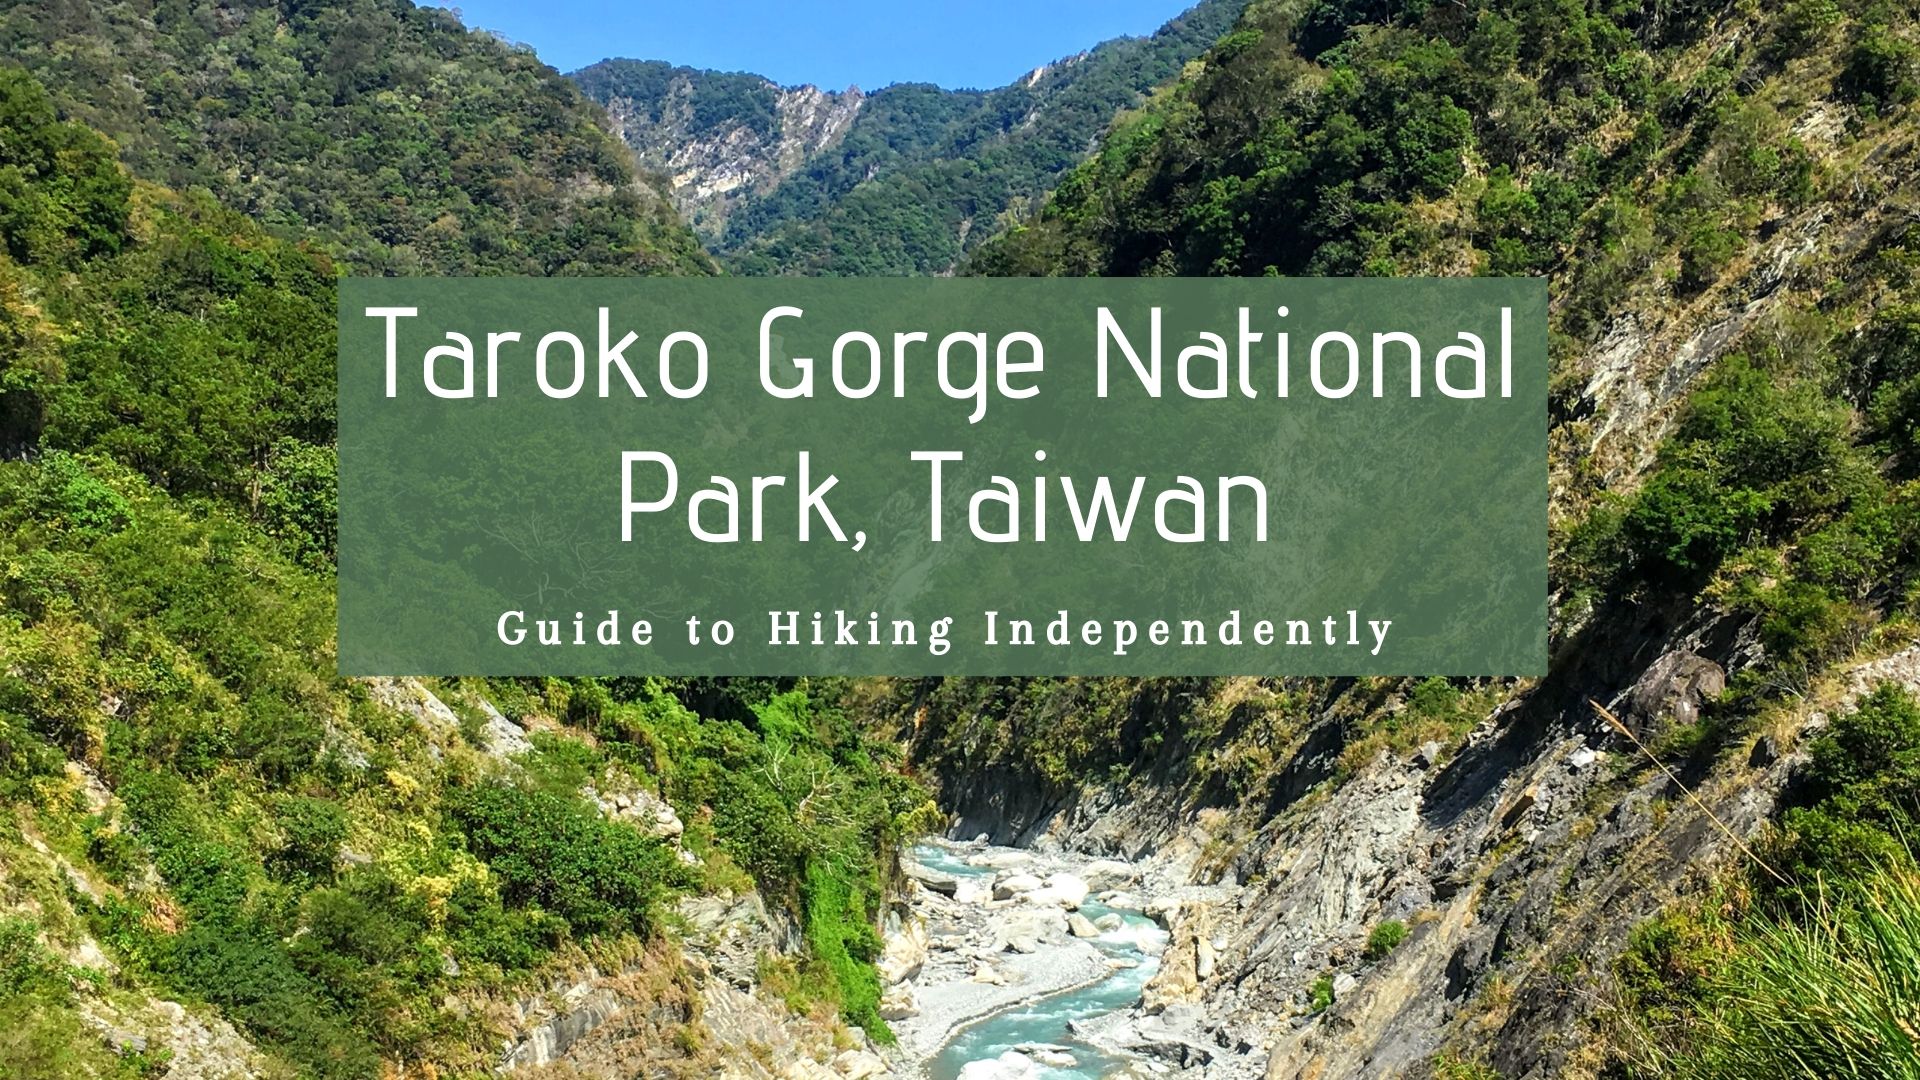 Hiking Taroko Gorge National Park Independently, from Hualien, Taiwan